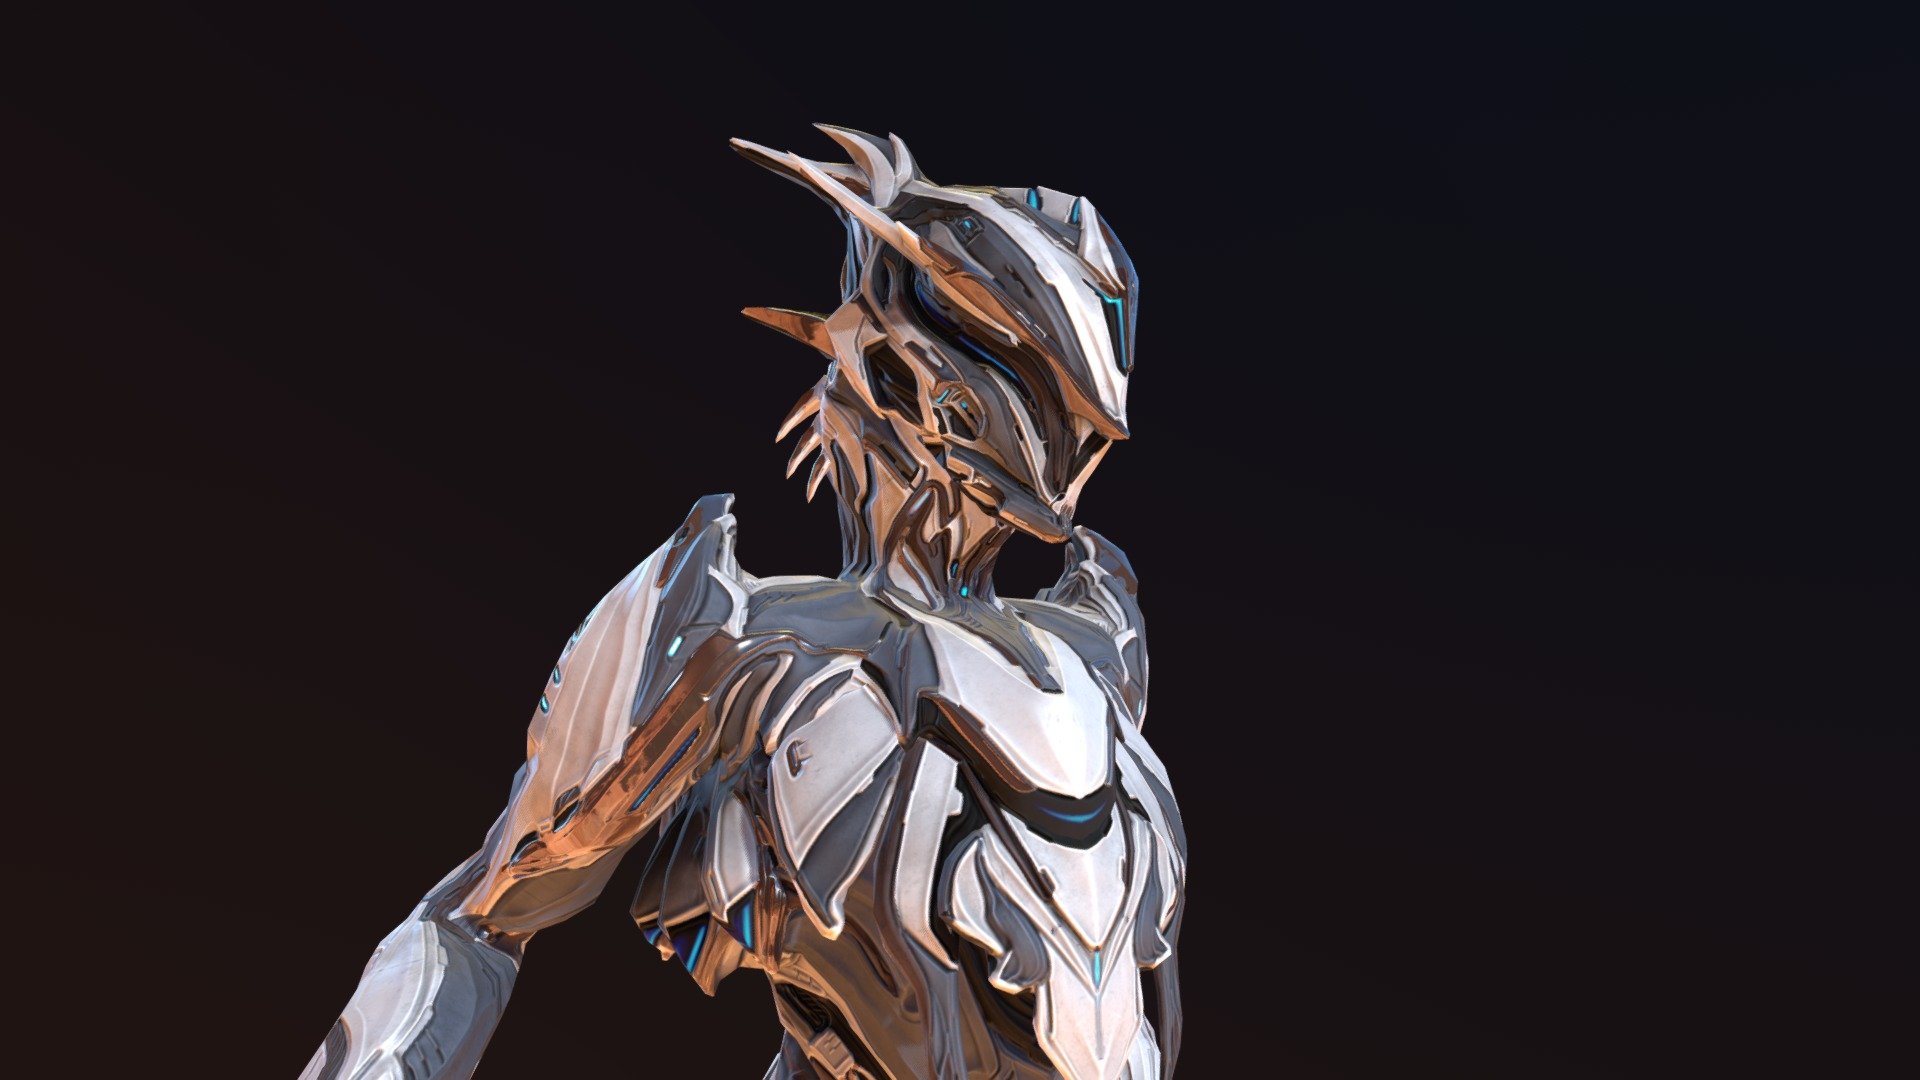 Skin and alt helmet for character Zephyr and model swap for Galatine(Heavy Blades). Original character and body mesh belongs to Digital Extremes - Strafe Zephyr Skin and alt helmet V3 - 3D model by prosetisen 3d model